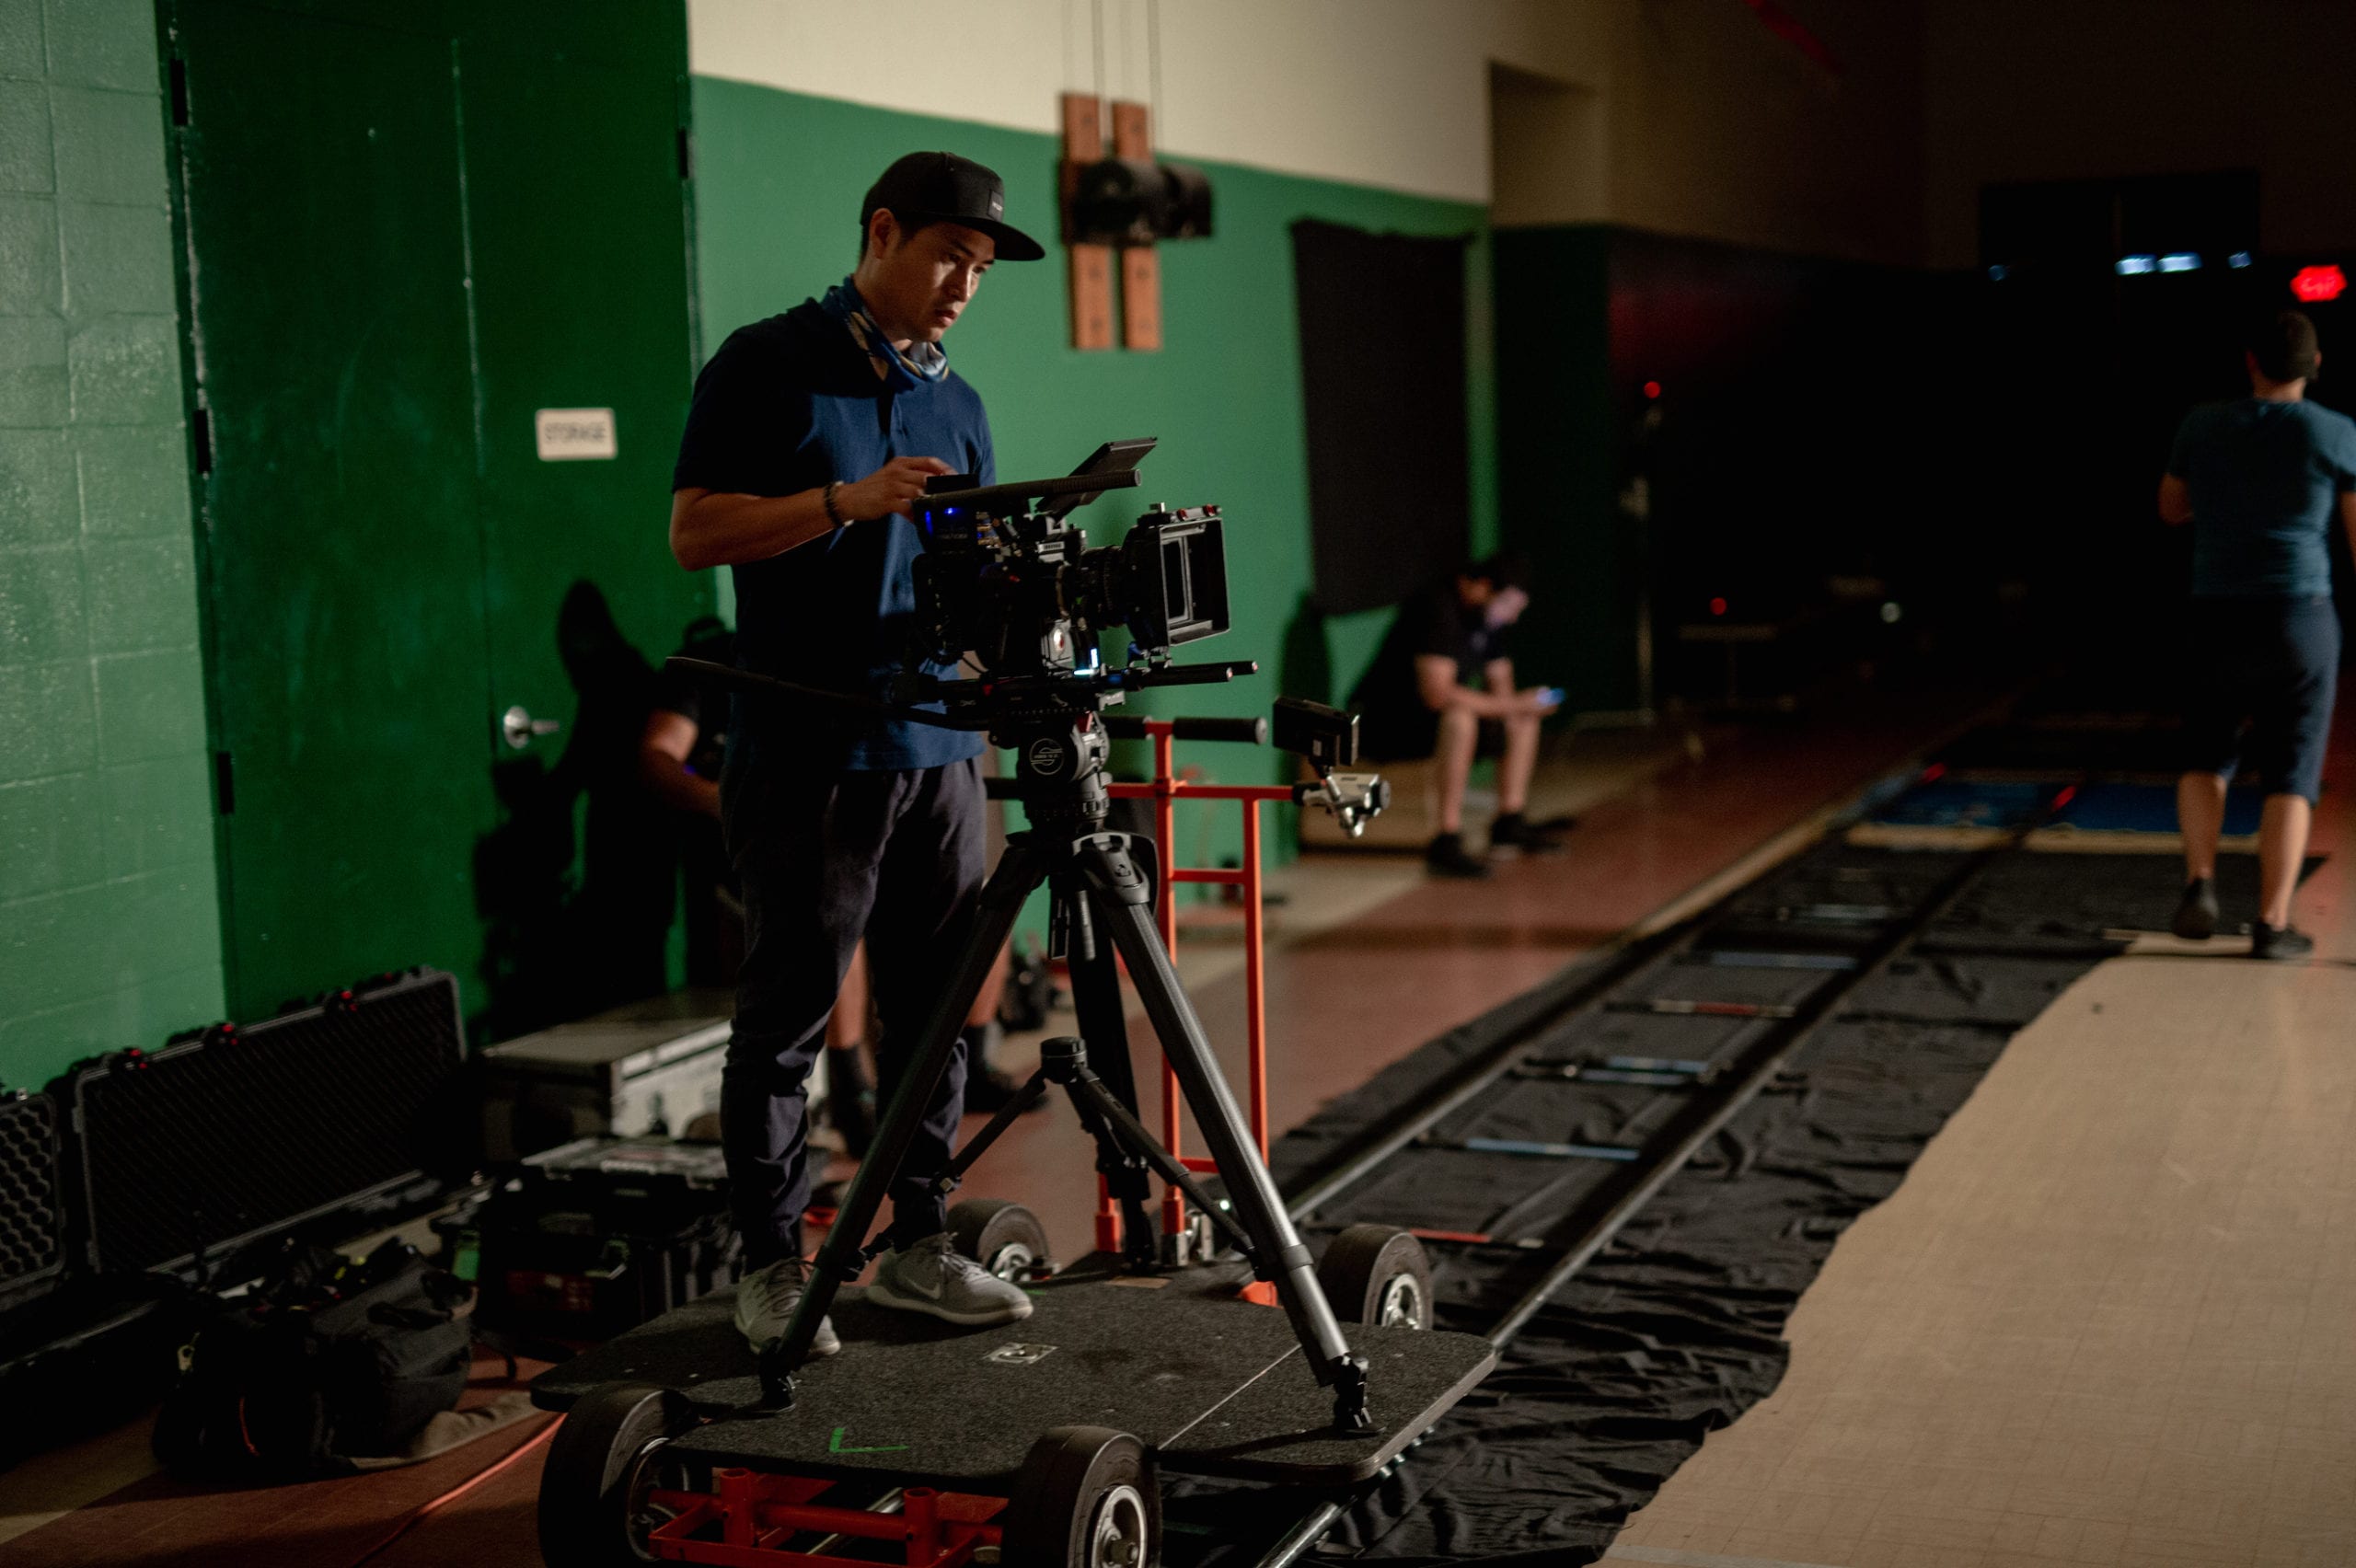 Nike BTS Film crew working on equipment for a scene